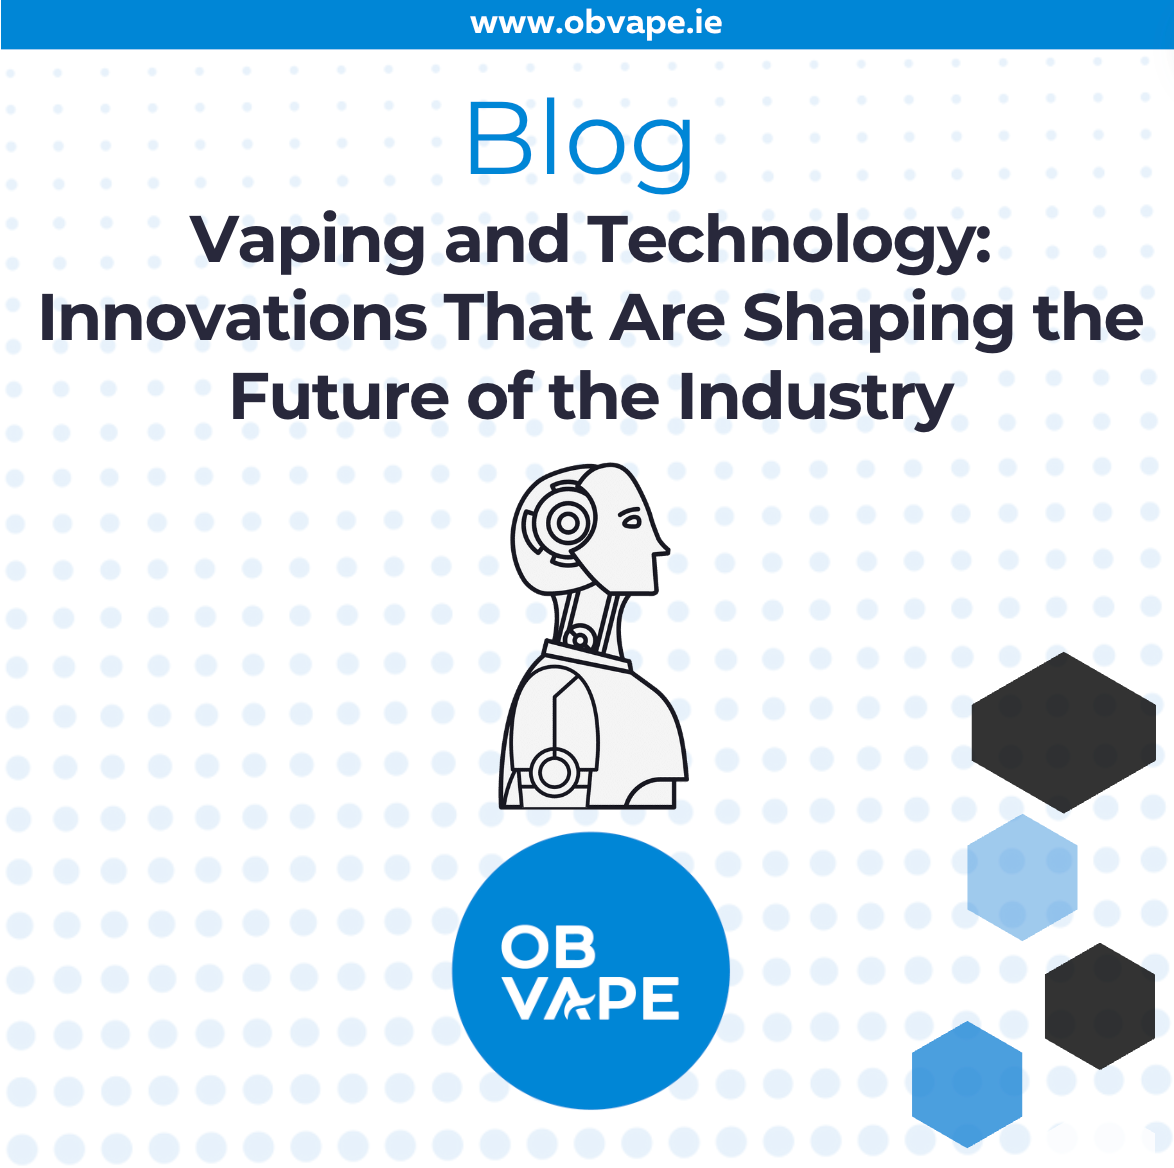 Vaping and Technology: Innovations That Are Shaping the Future of the Industry